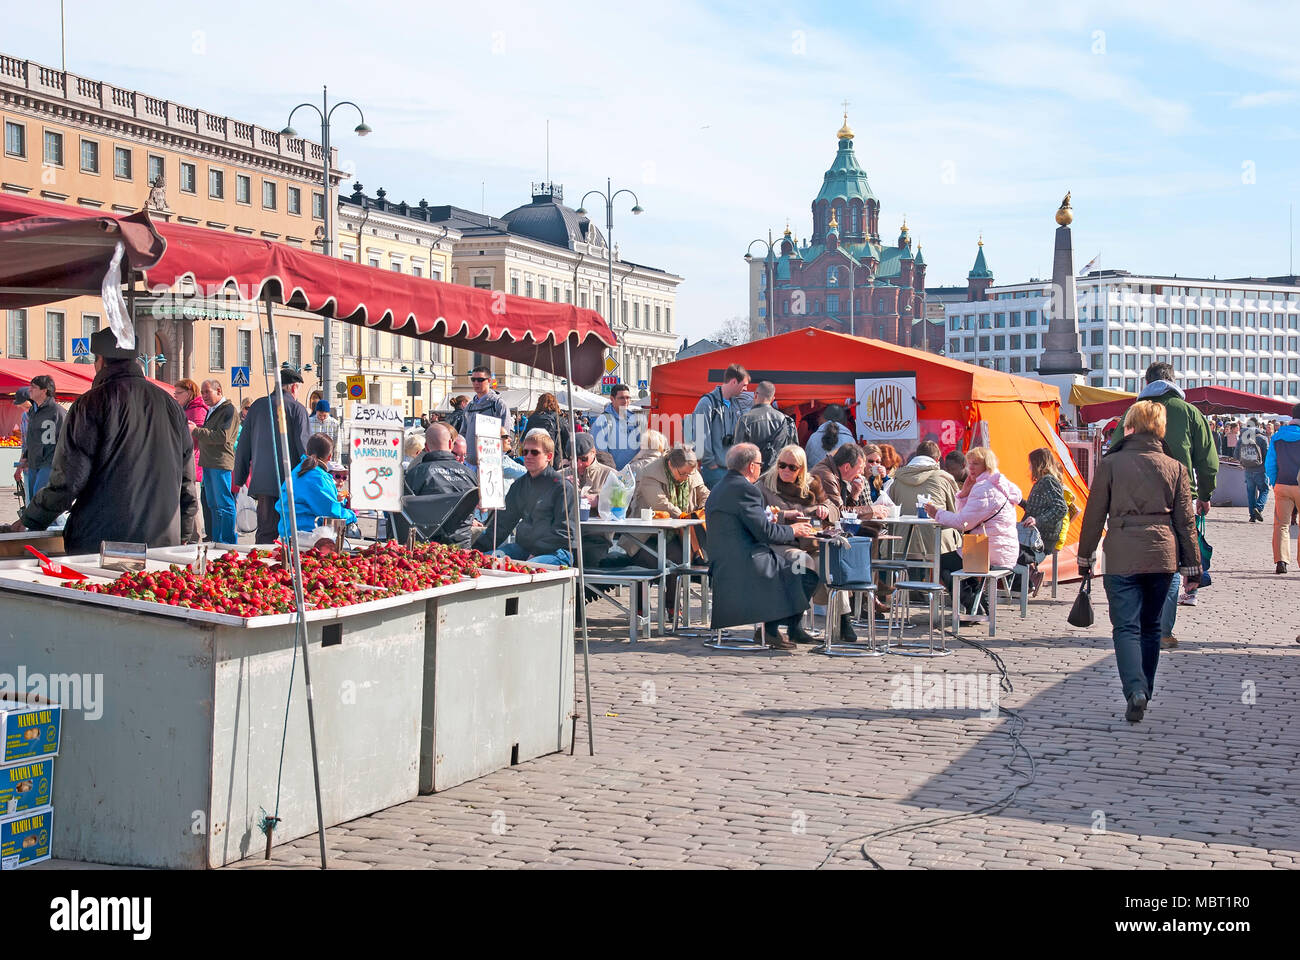 HELSINKI, FINLAND - APRIL 16, 2011:  People in the open air cafe on the Market Square near Gulf of Finland. On the background is Uspenski Cathedral Stock Photo